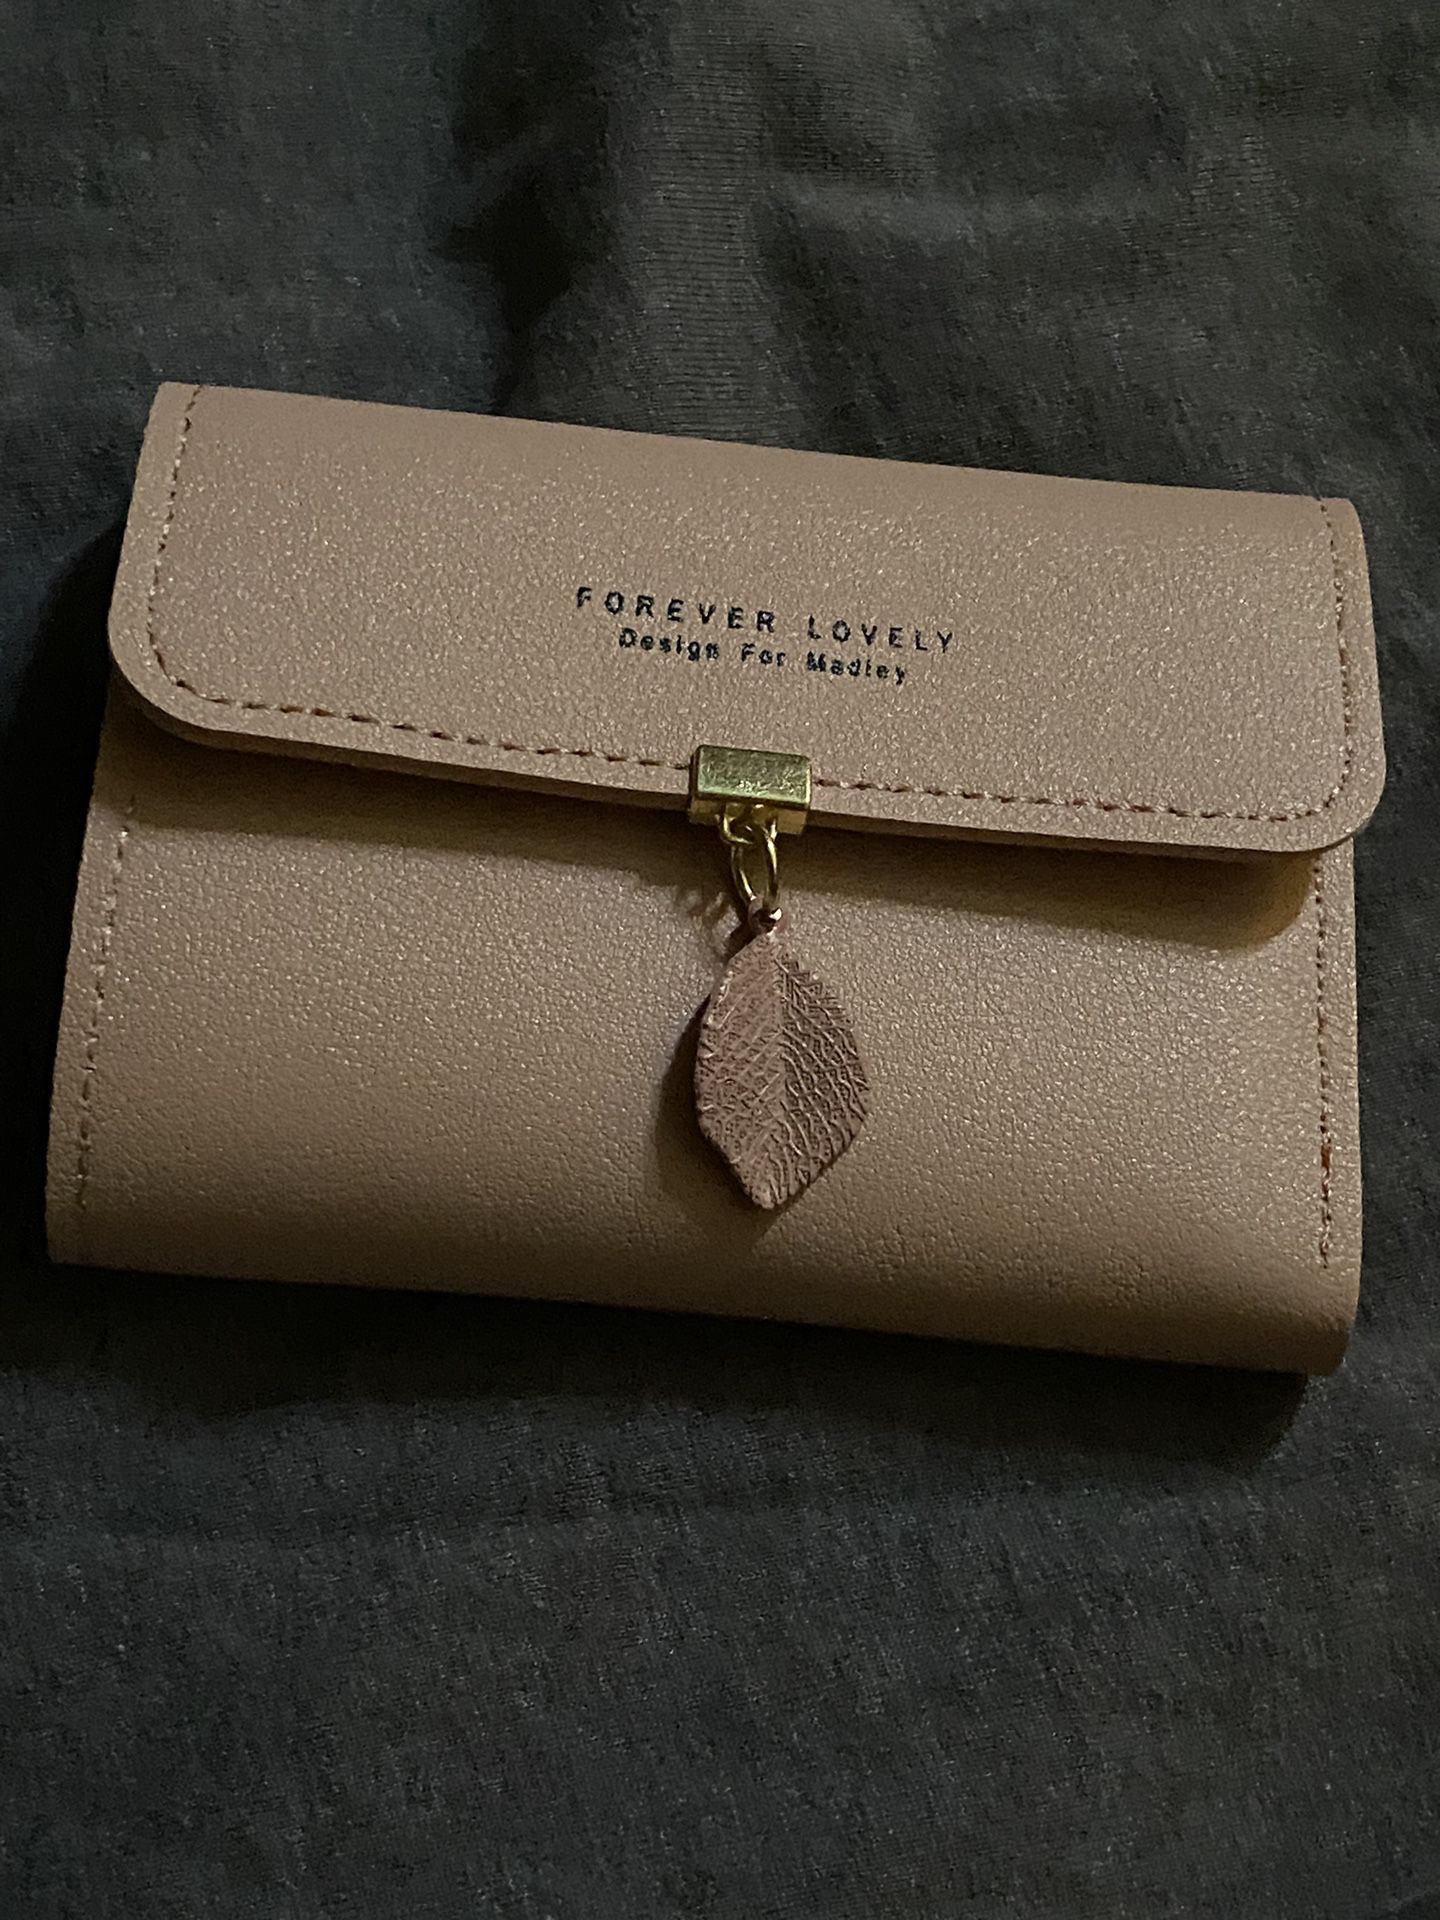 This Forever lovely design for Madiey trifold clutch coin purse is the perfect addition to any woman's casual wallet collection. With a solid pink 